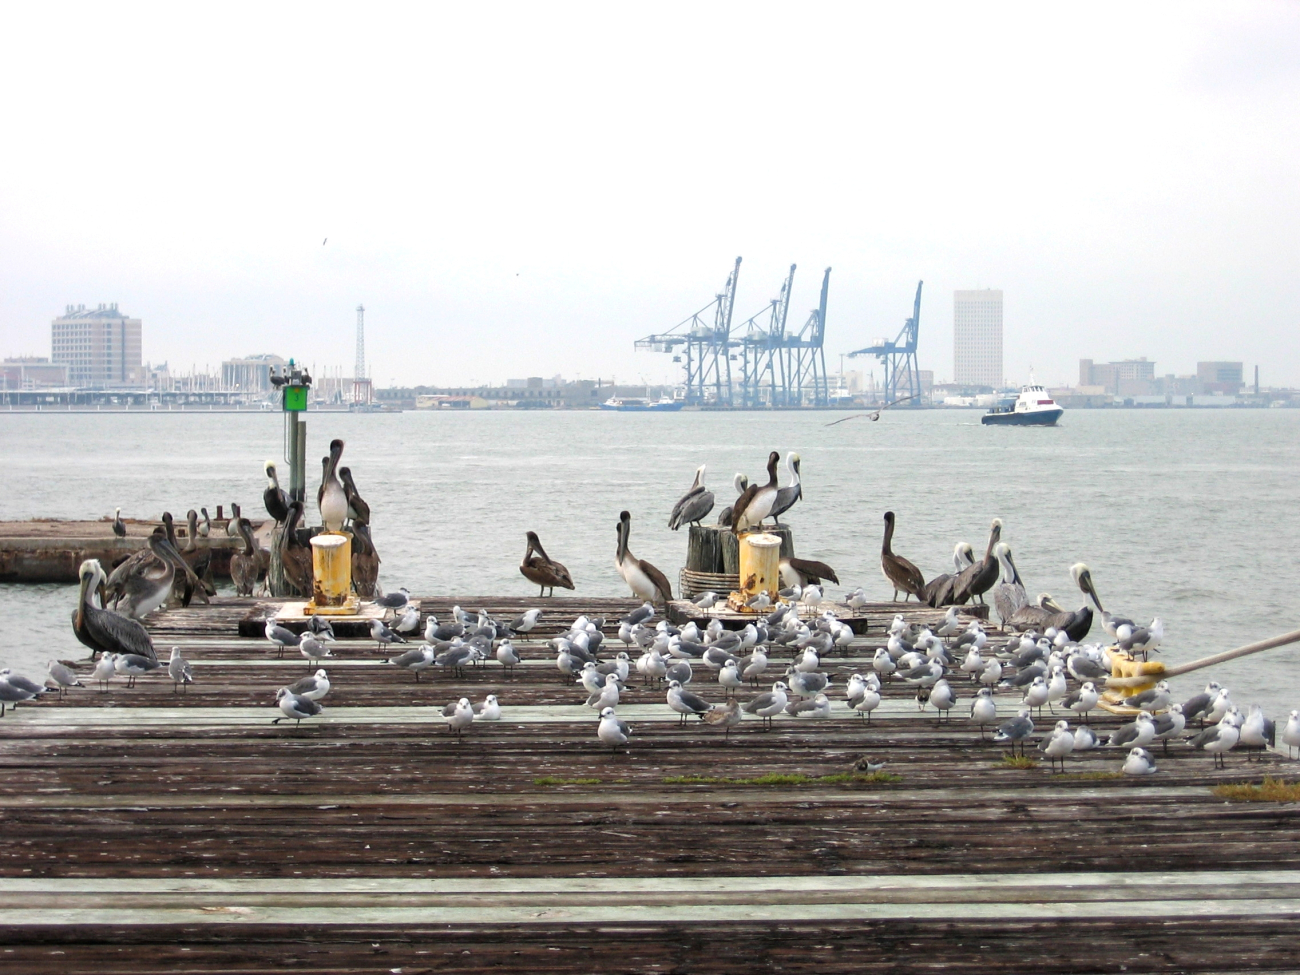 Pelicans and gulls share a pier